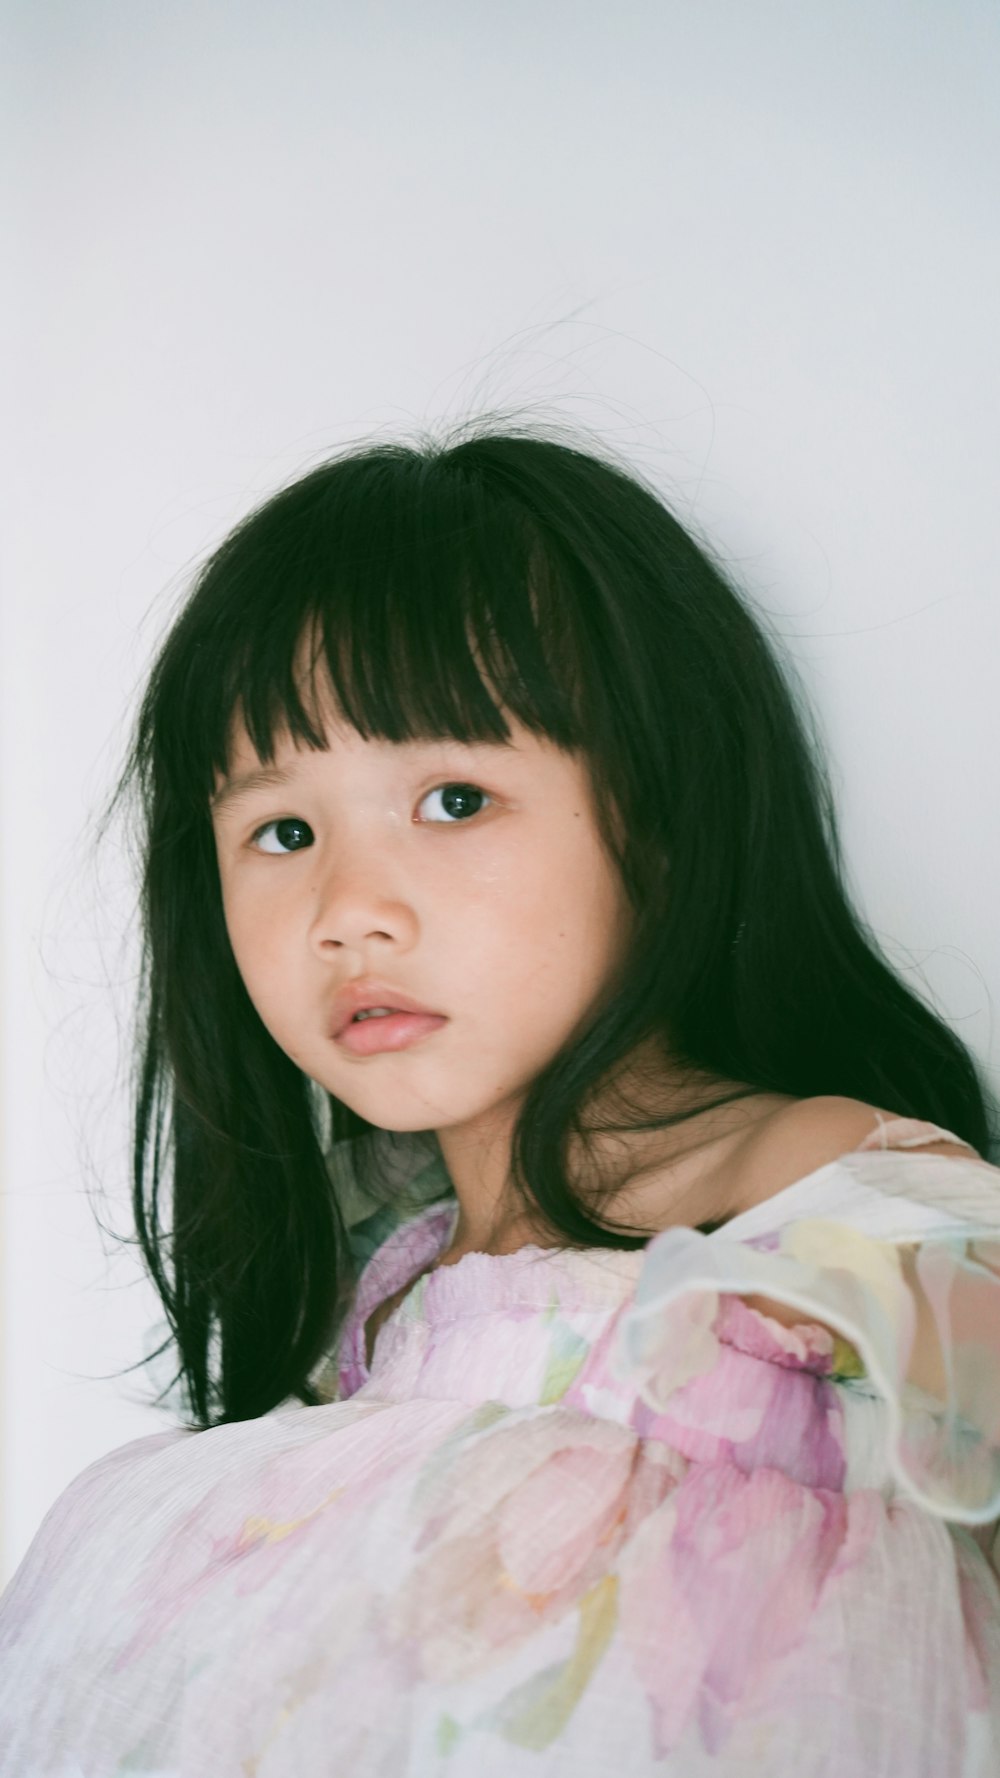 a little girl with long black hair wearing a dress